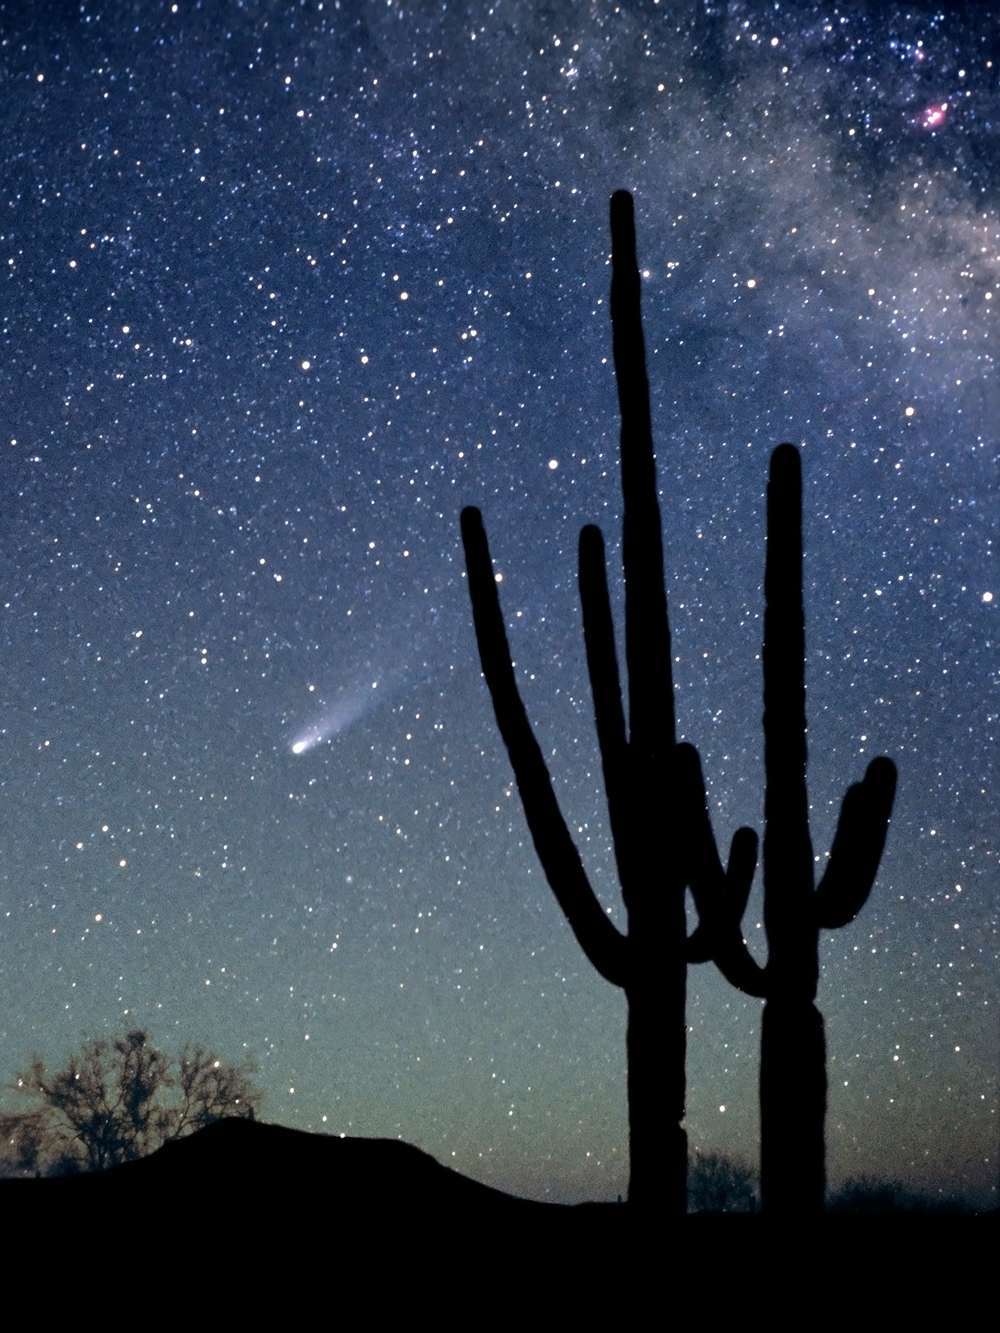 Halley’s Comet in the night sky above cactuses